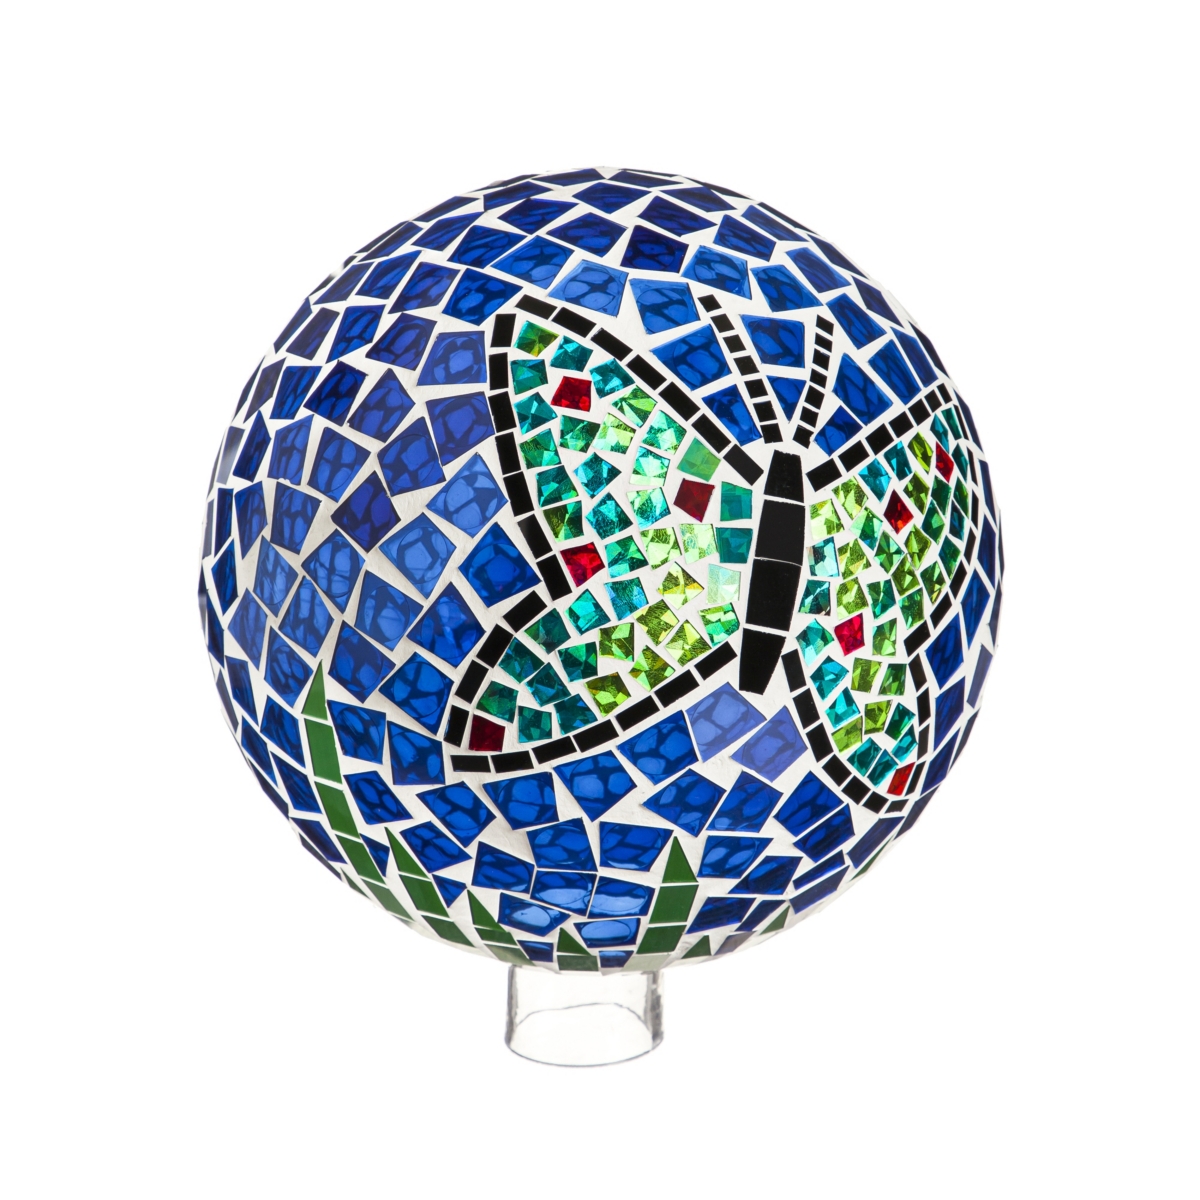 Evergreen 10" Mosaic Glass Gazing Ball, Teal Butterfly Garden And Yard Decor In Multicolored